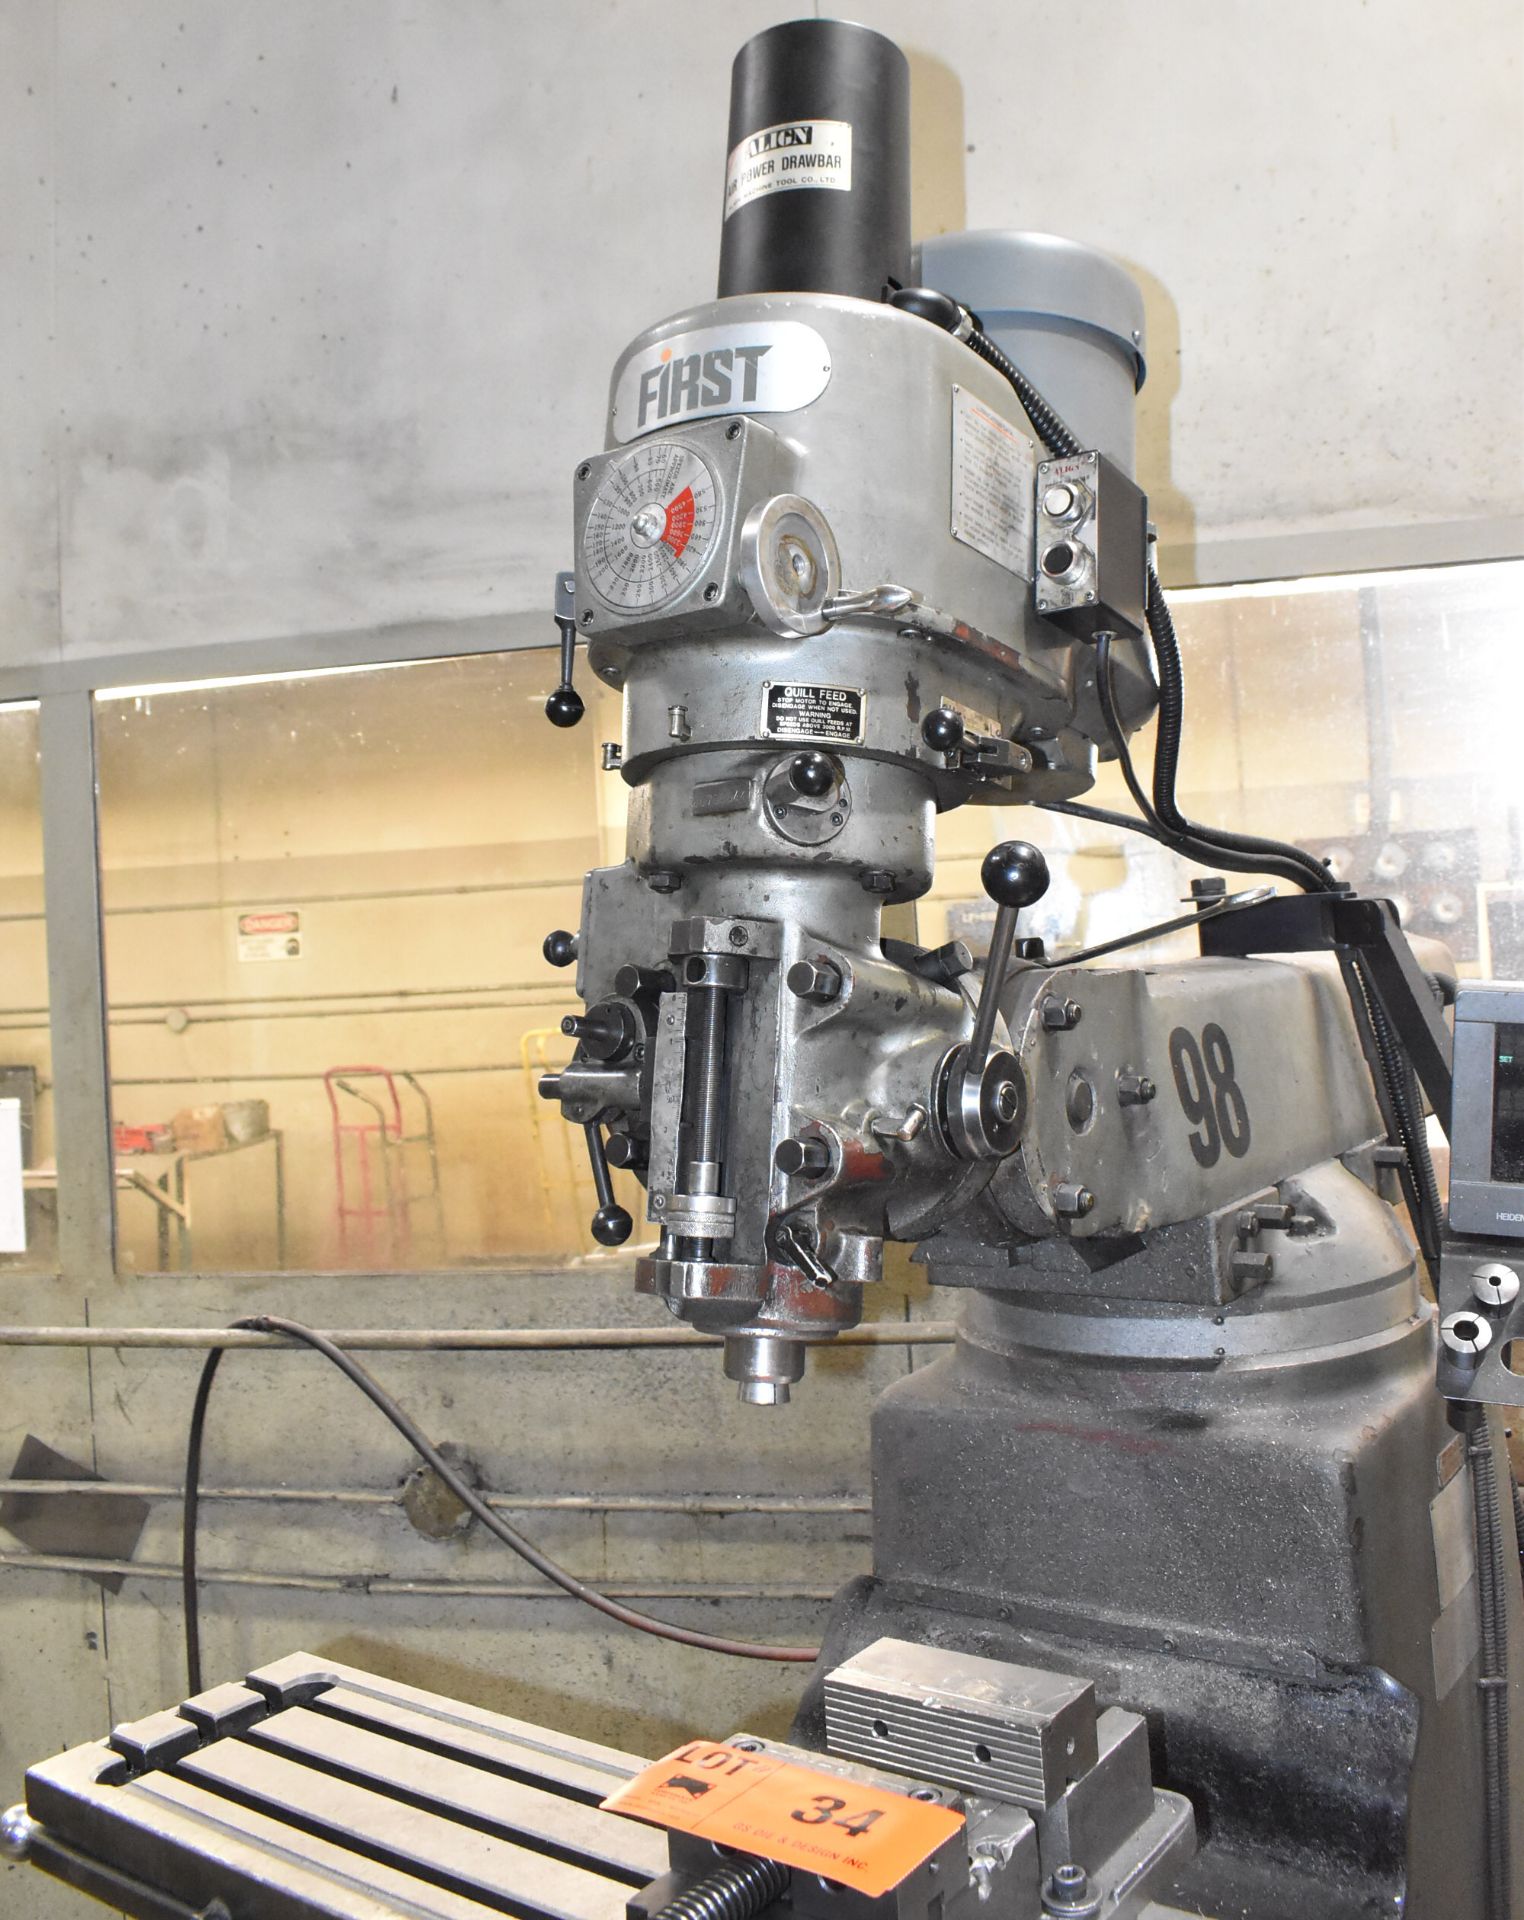 FIRST LC-185VS VERTICAL MILLING MACHINES WITH 50"X10" TABLE, SPEEDS TO 4500 RPM, ALIGN AIR POWER - Image 4 of 8